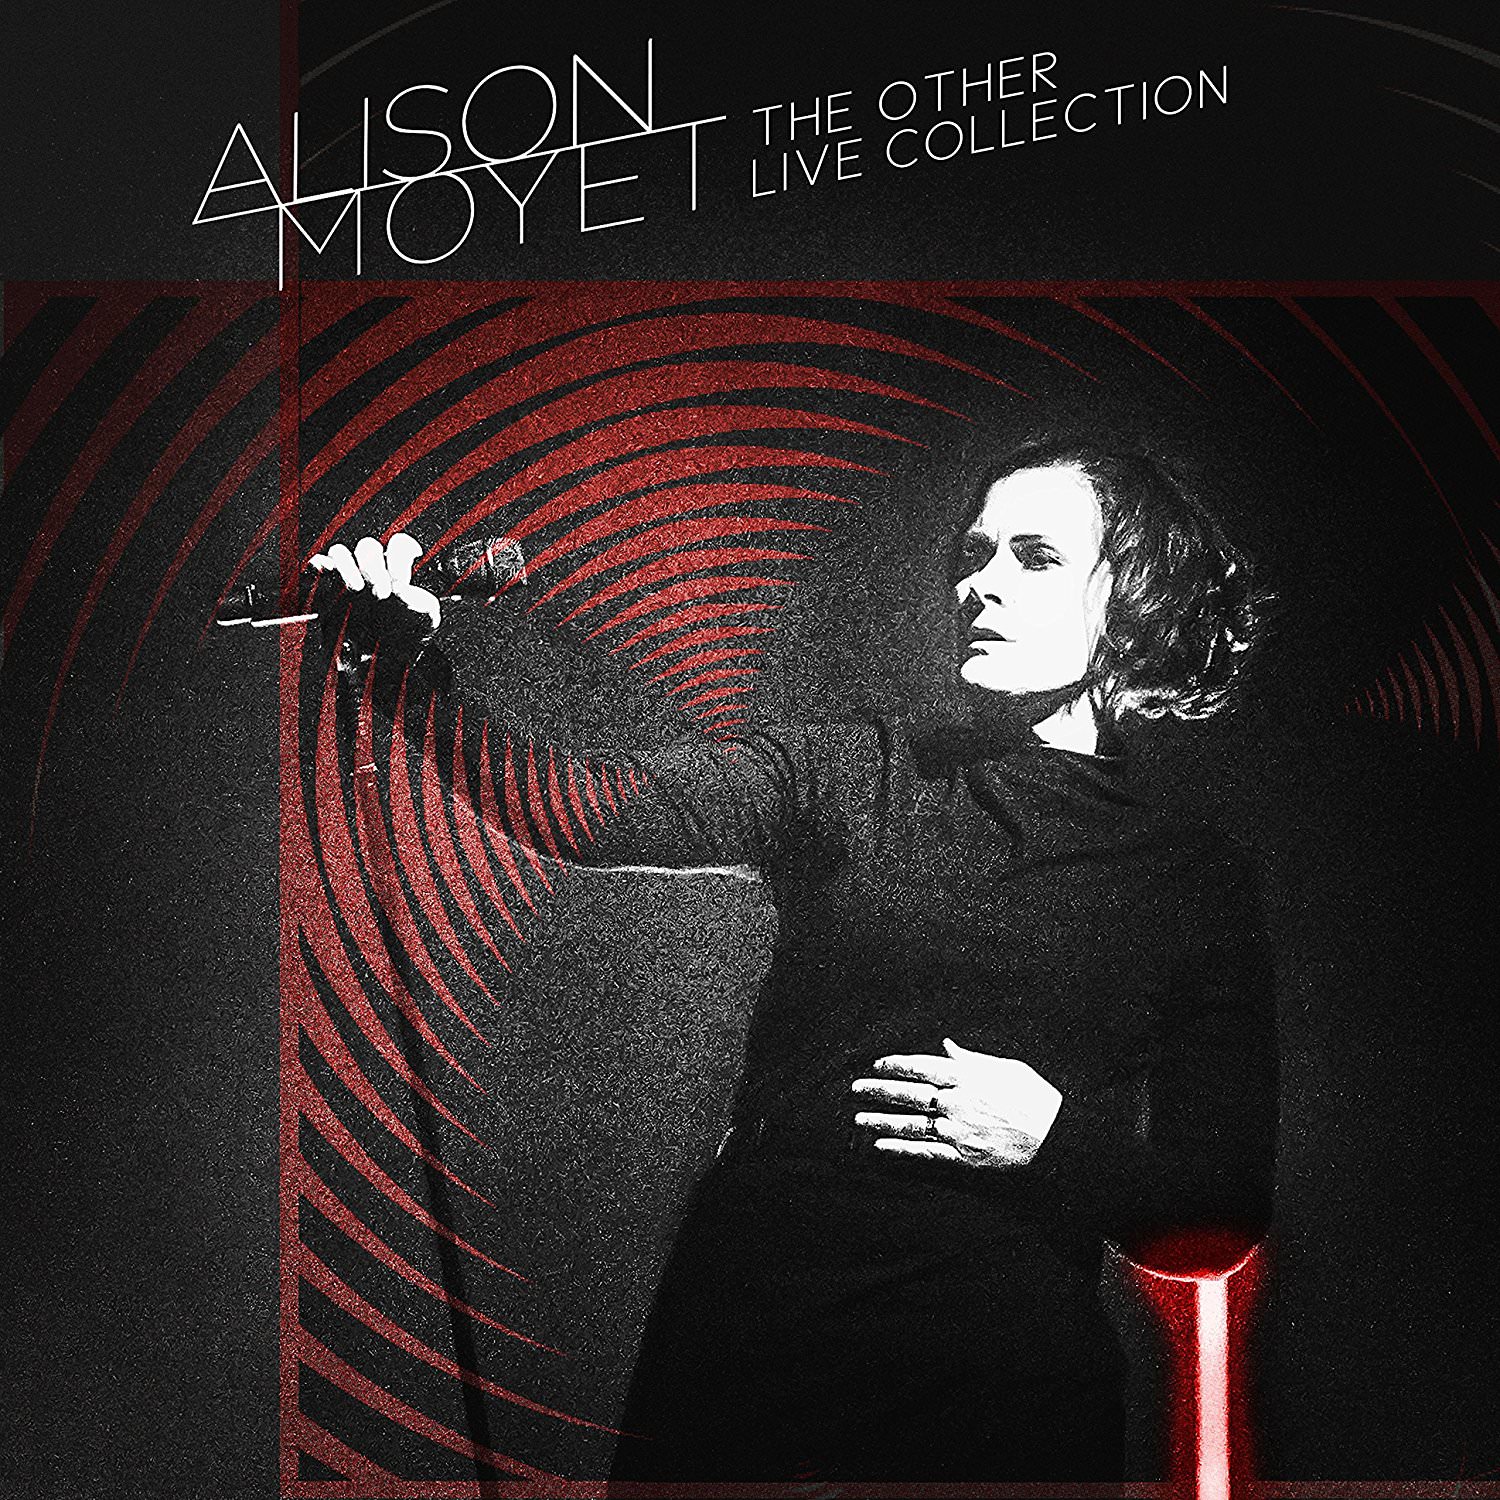 Alison Moyet - The Other Live Collection (2018) [FLAC 24bit/44,1kHz]